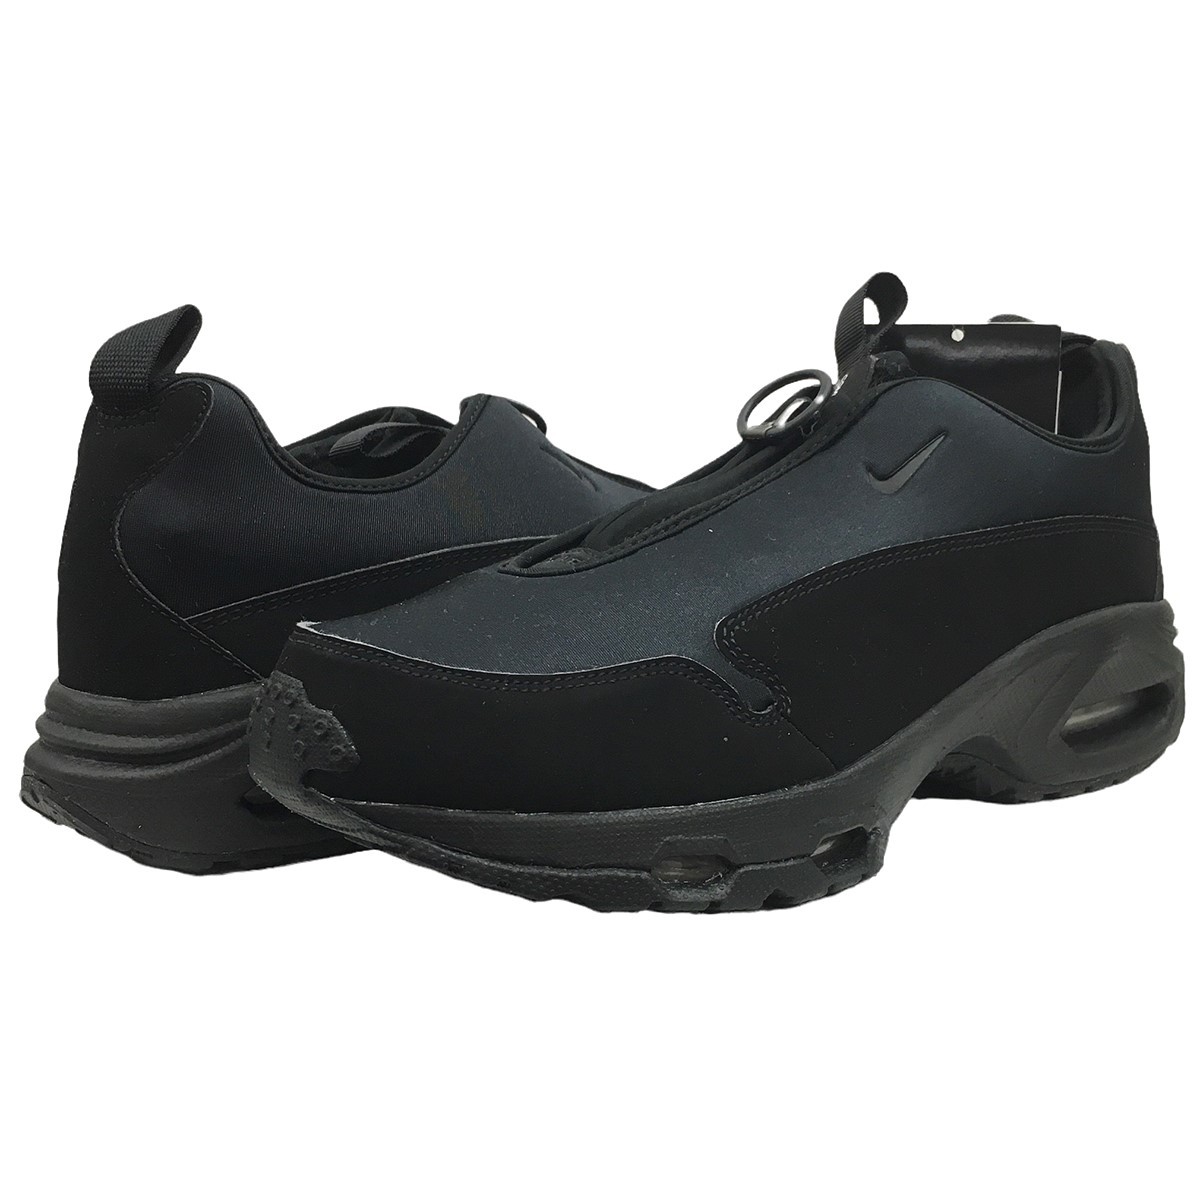 COMME des GARCONS HOMME PLUS NIKE 希少 22SS Air Sunder Max SP エア サンダー マックス  スニーカー：8056000119992